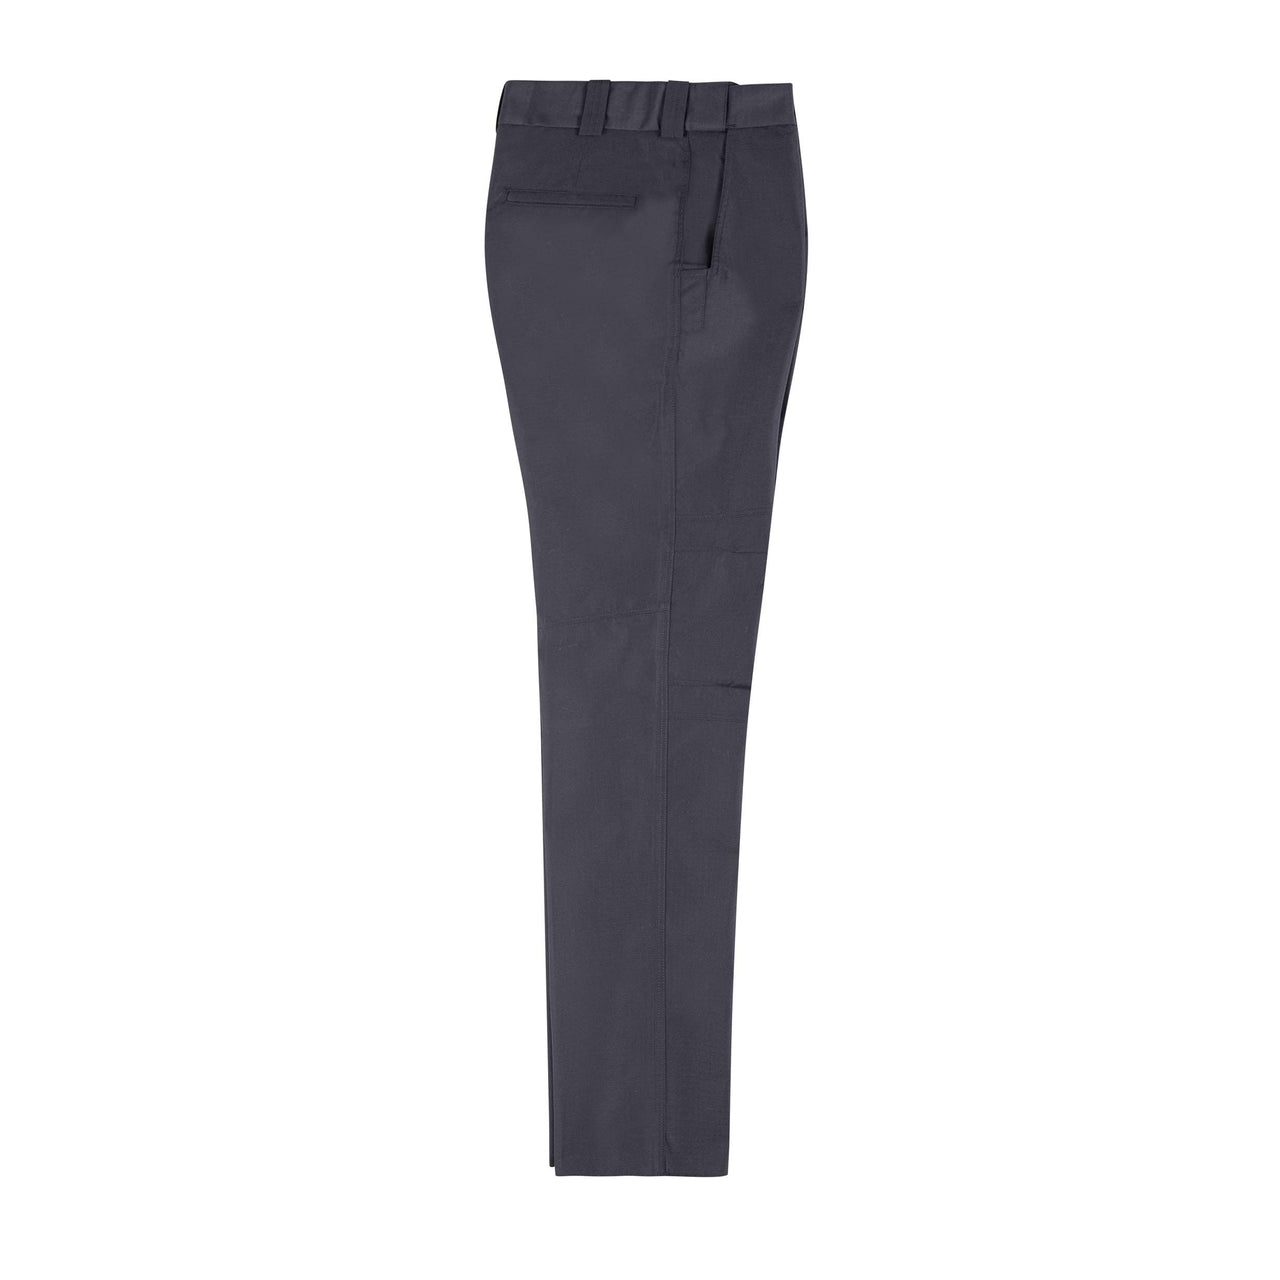 Fire Store | Fuego Fire Center | Firefighter Gear | Blauer Women's Responder FR Work Pants with Glenguard® (8230W) | Our four-pocket Women's ResponderFR™ Station Pants are the most comfortable FR pants you’ll ever own, with no break-in required, and are dual-certified to both the NFPA 1975:2019 Stationwear standard and the NFPA 1977:2016 Standard on Protective Clothing and Equipment for Wildland Fire Fighting.